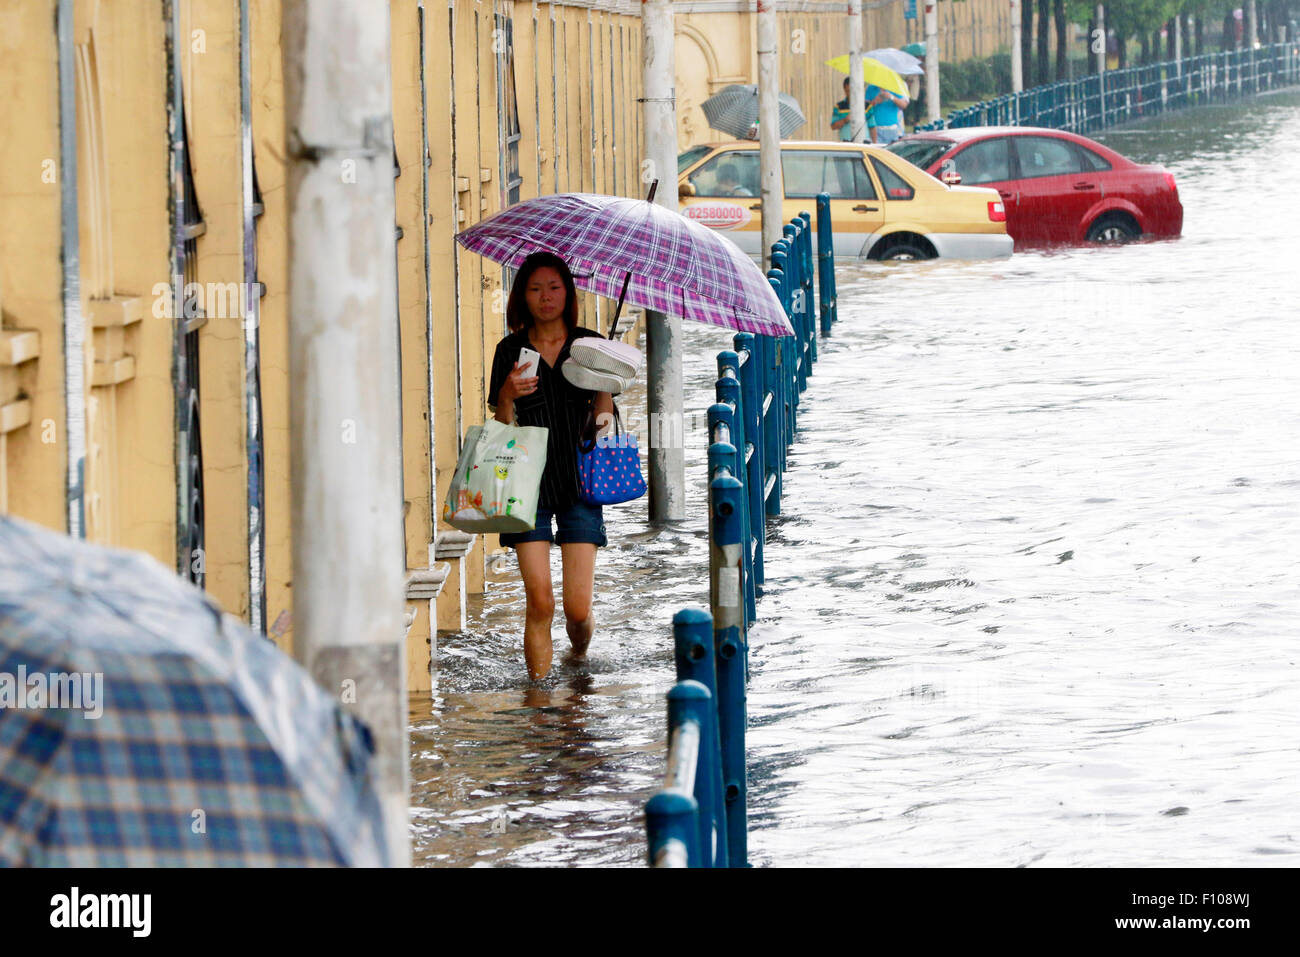 Shanghai. 24th Aug, 2015. A woman walks on a waterlogged road in rain in east China's Shanghaiy, Aug. 24, 2015. Shanghai witnessed gales and rainstorms since Sunday night under the influence of the approaching typhoon Swan. Credit:  Zhao Yun/Xinhua/Alamy Live News Stock Photo